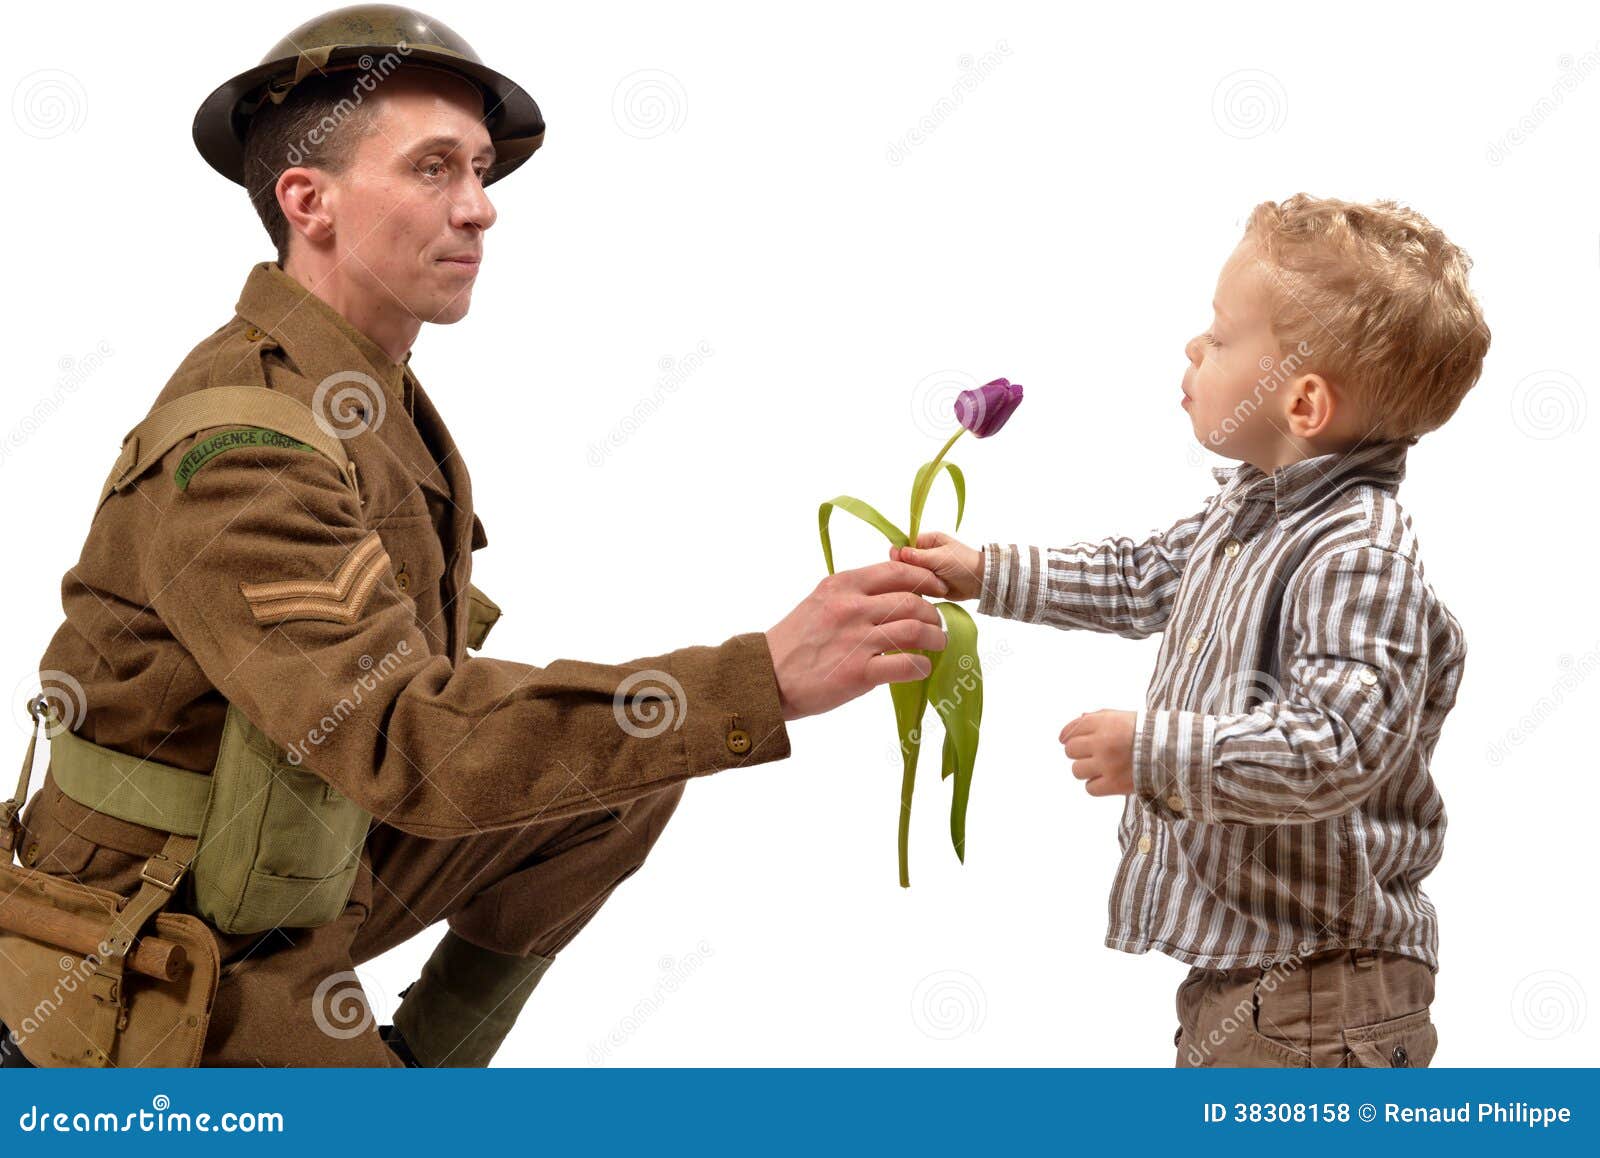 a young child gives a flower to a british soldier